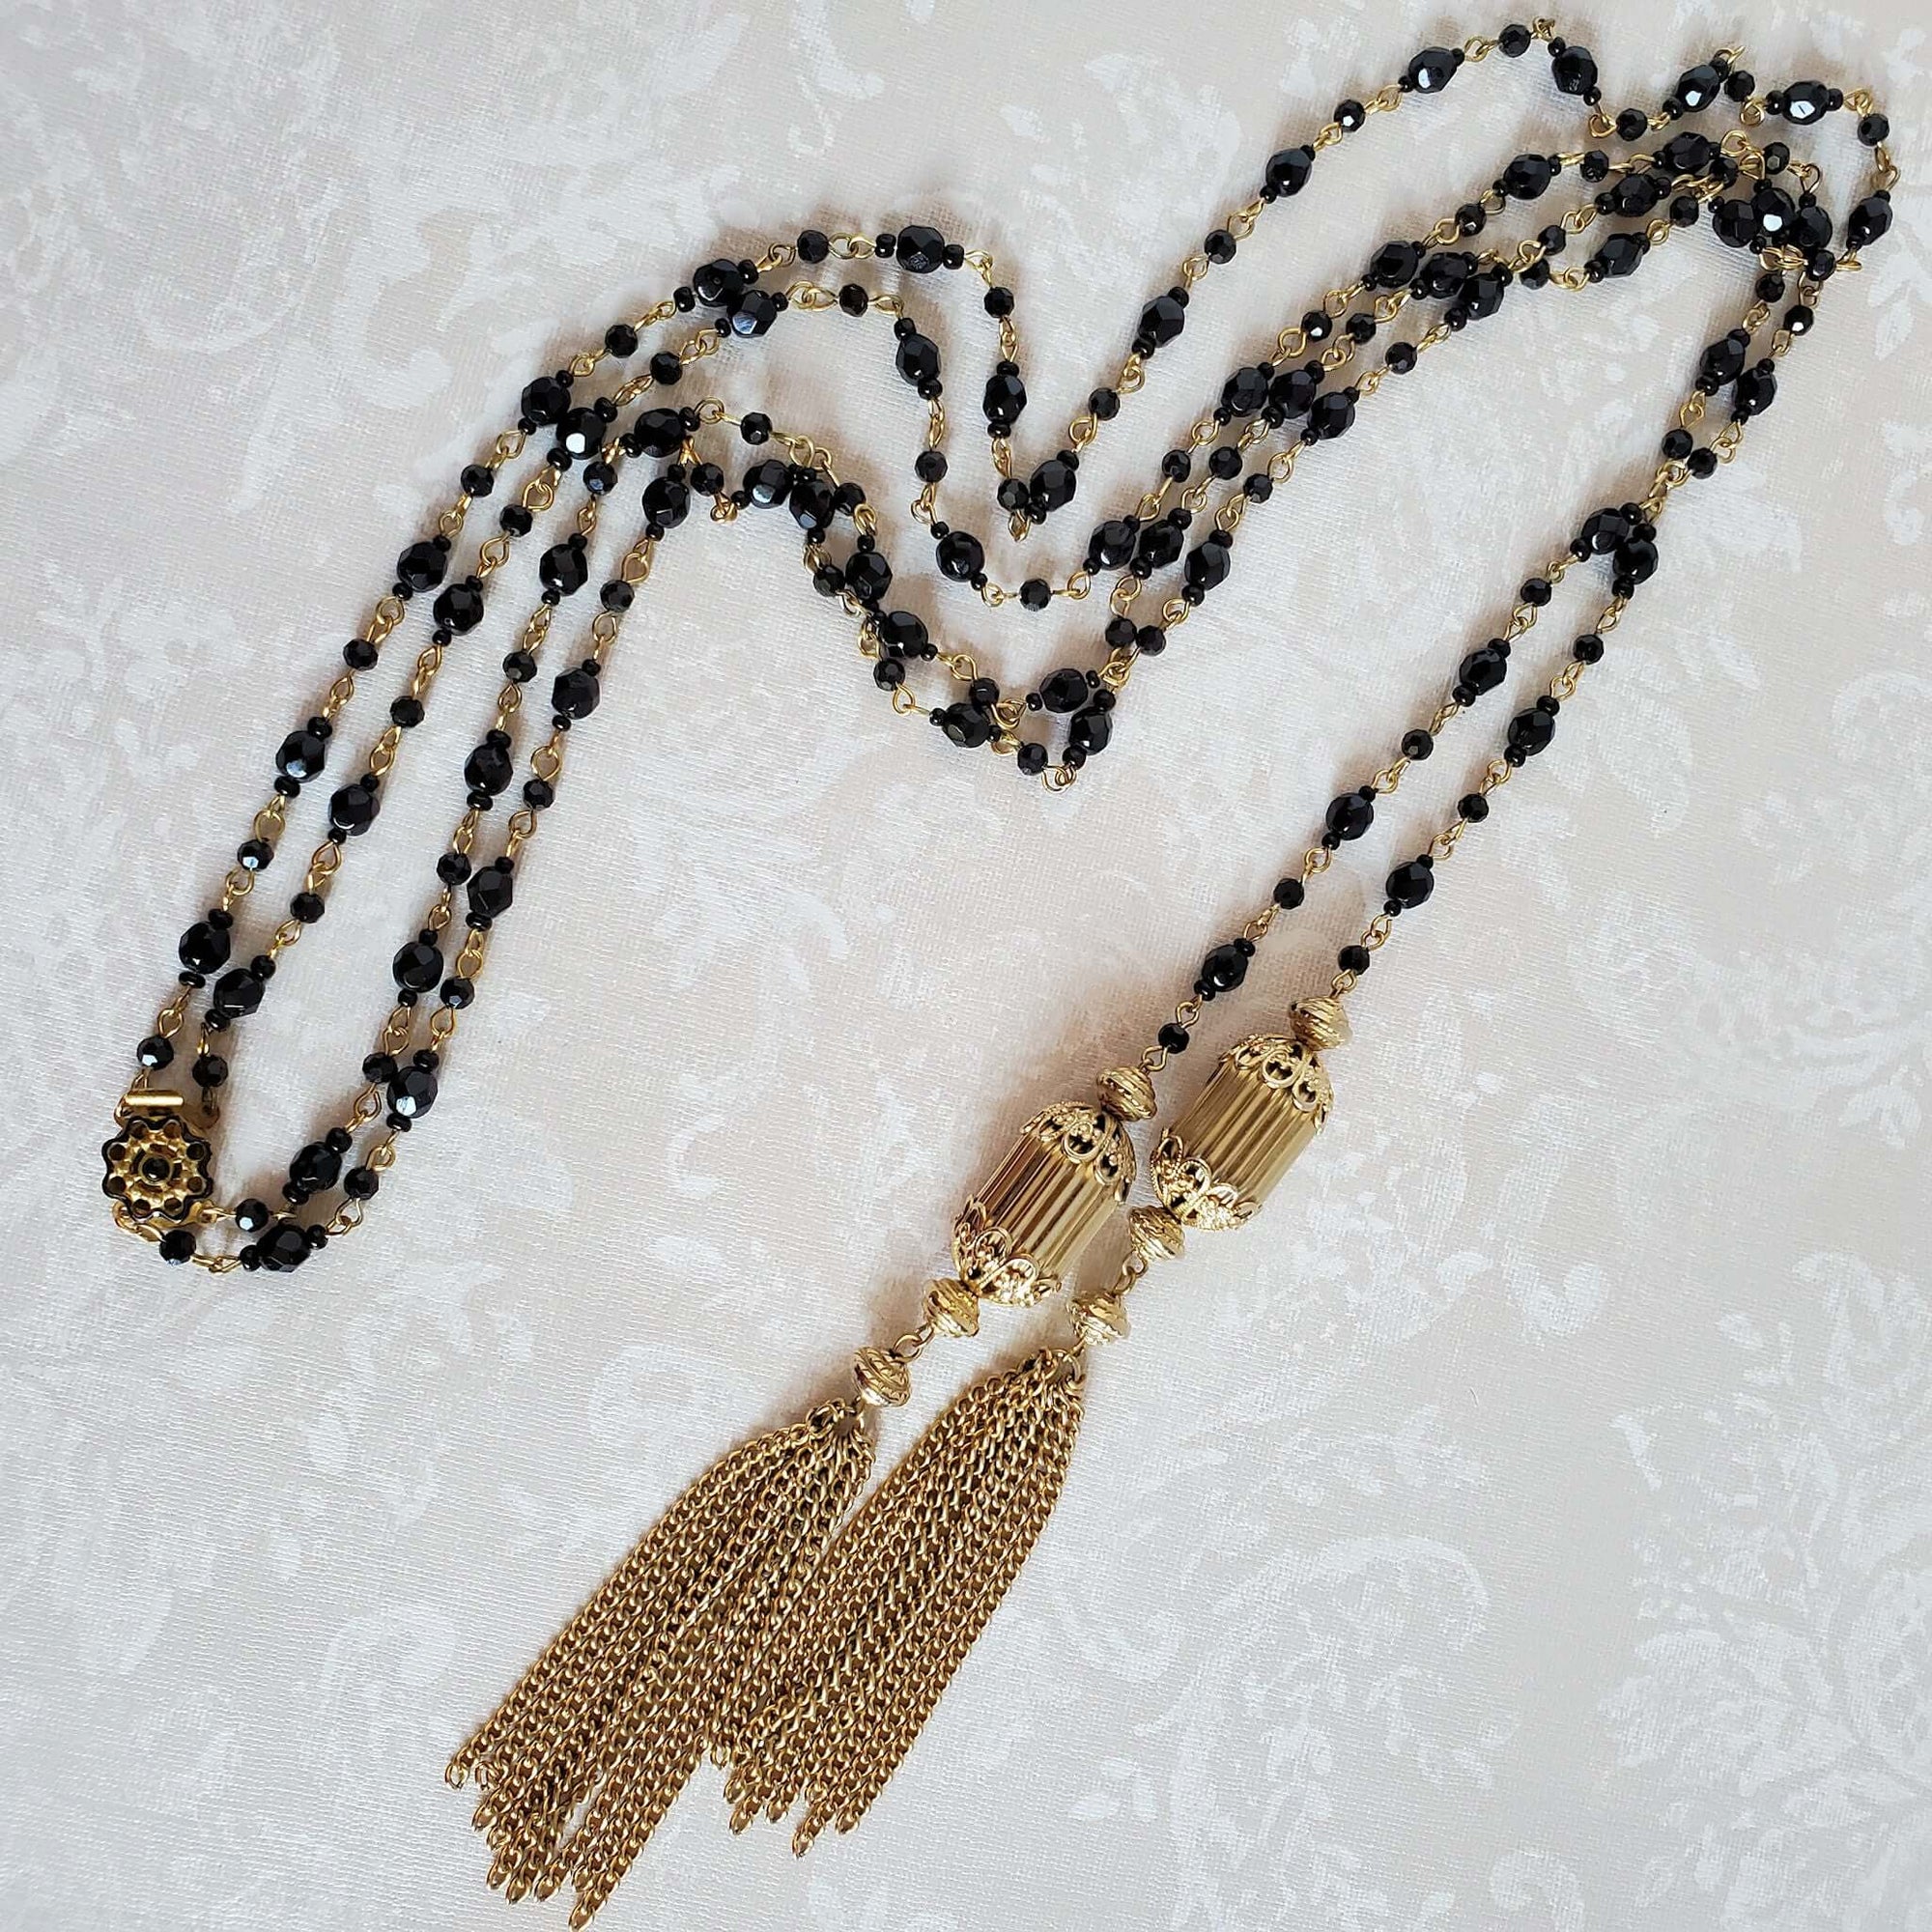 Tow Strand Black Bead Necklace with Gold Tassels